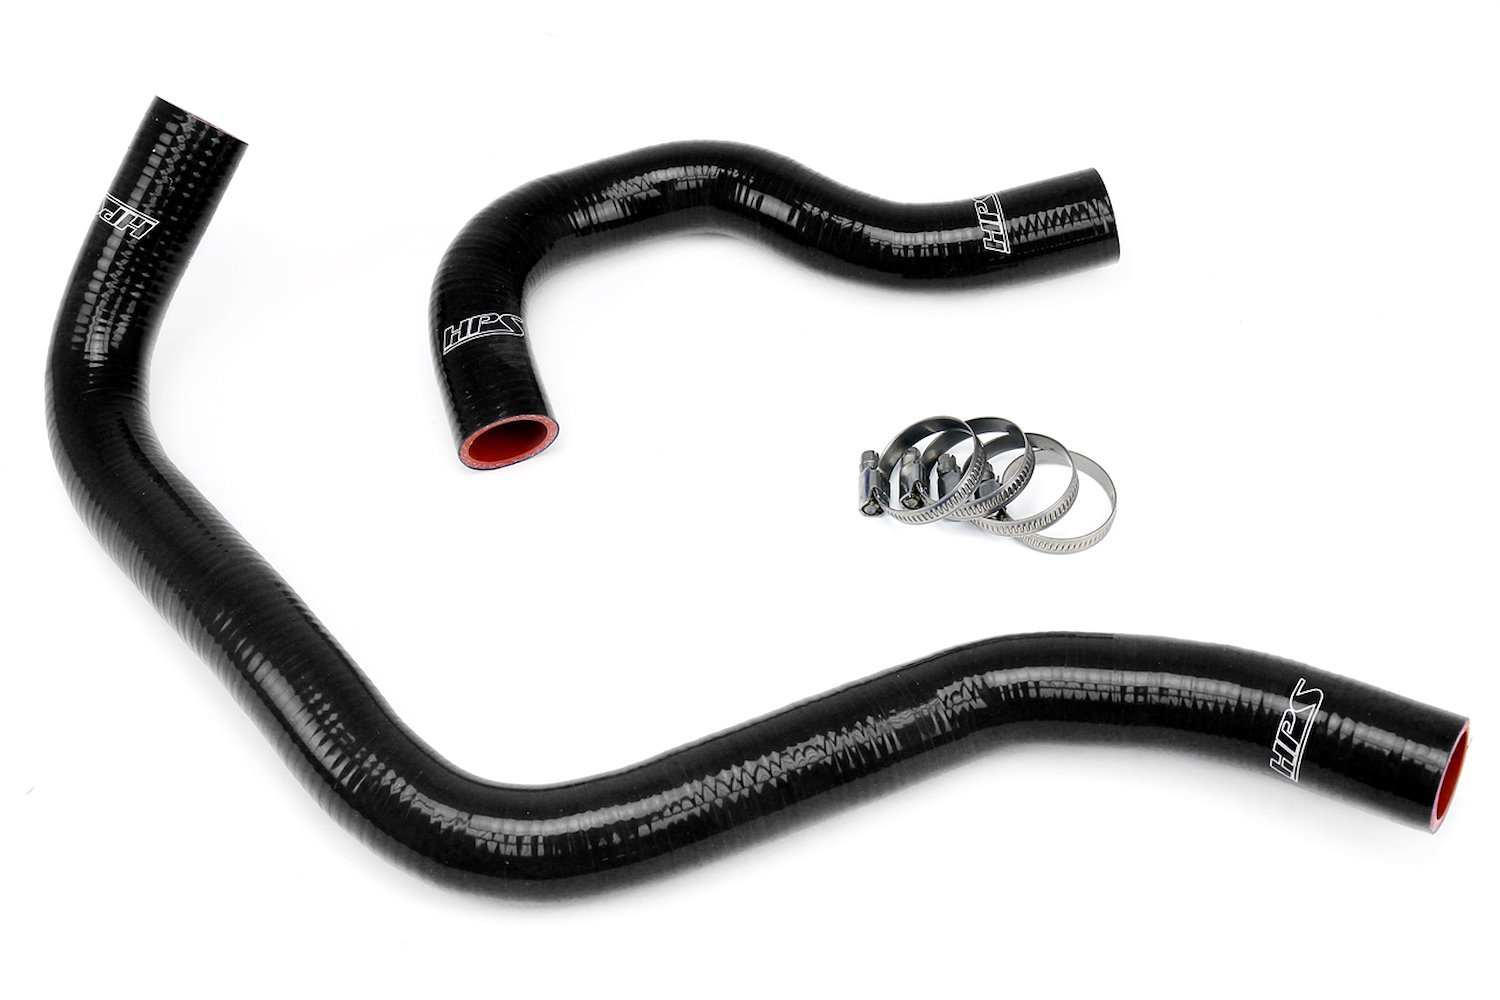 57-1002-BLK Radiator Hose Kit, High-Temp 3-Ply Reinforced Silicone, Replace OEM Rubber Radiator Coolant Hoses